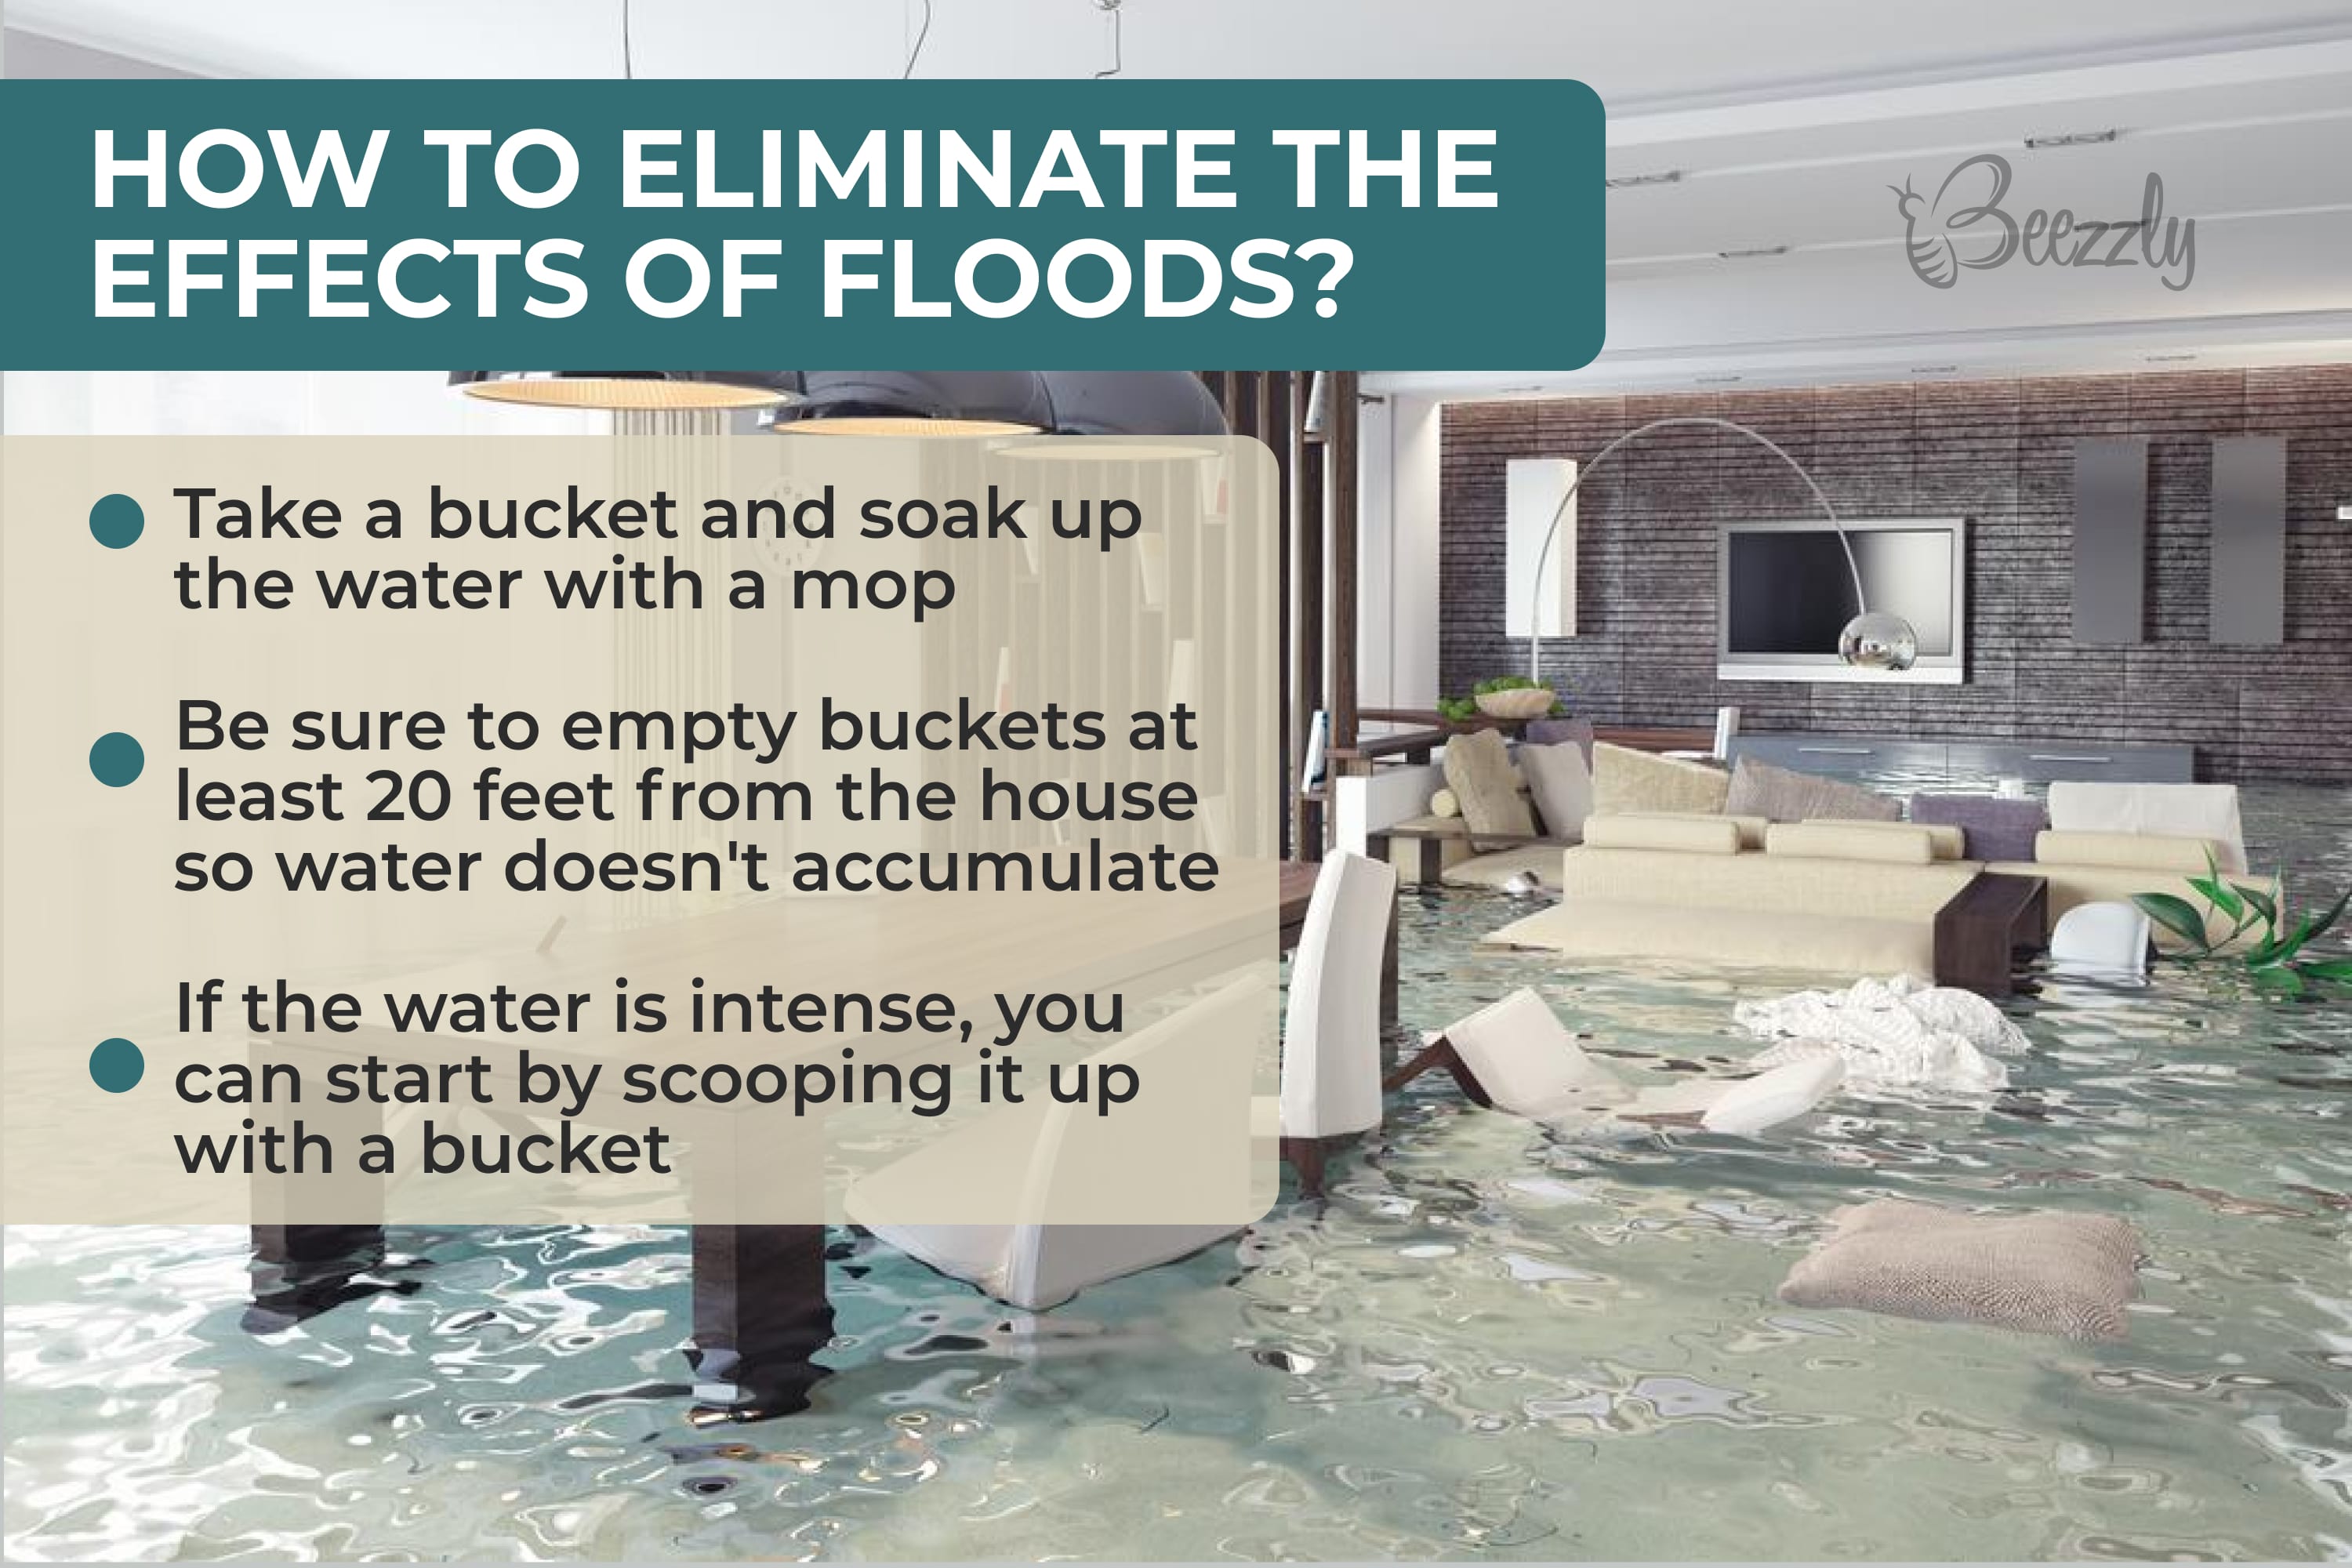 How to eliminate the effects of floods